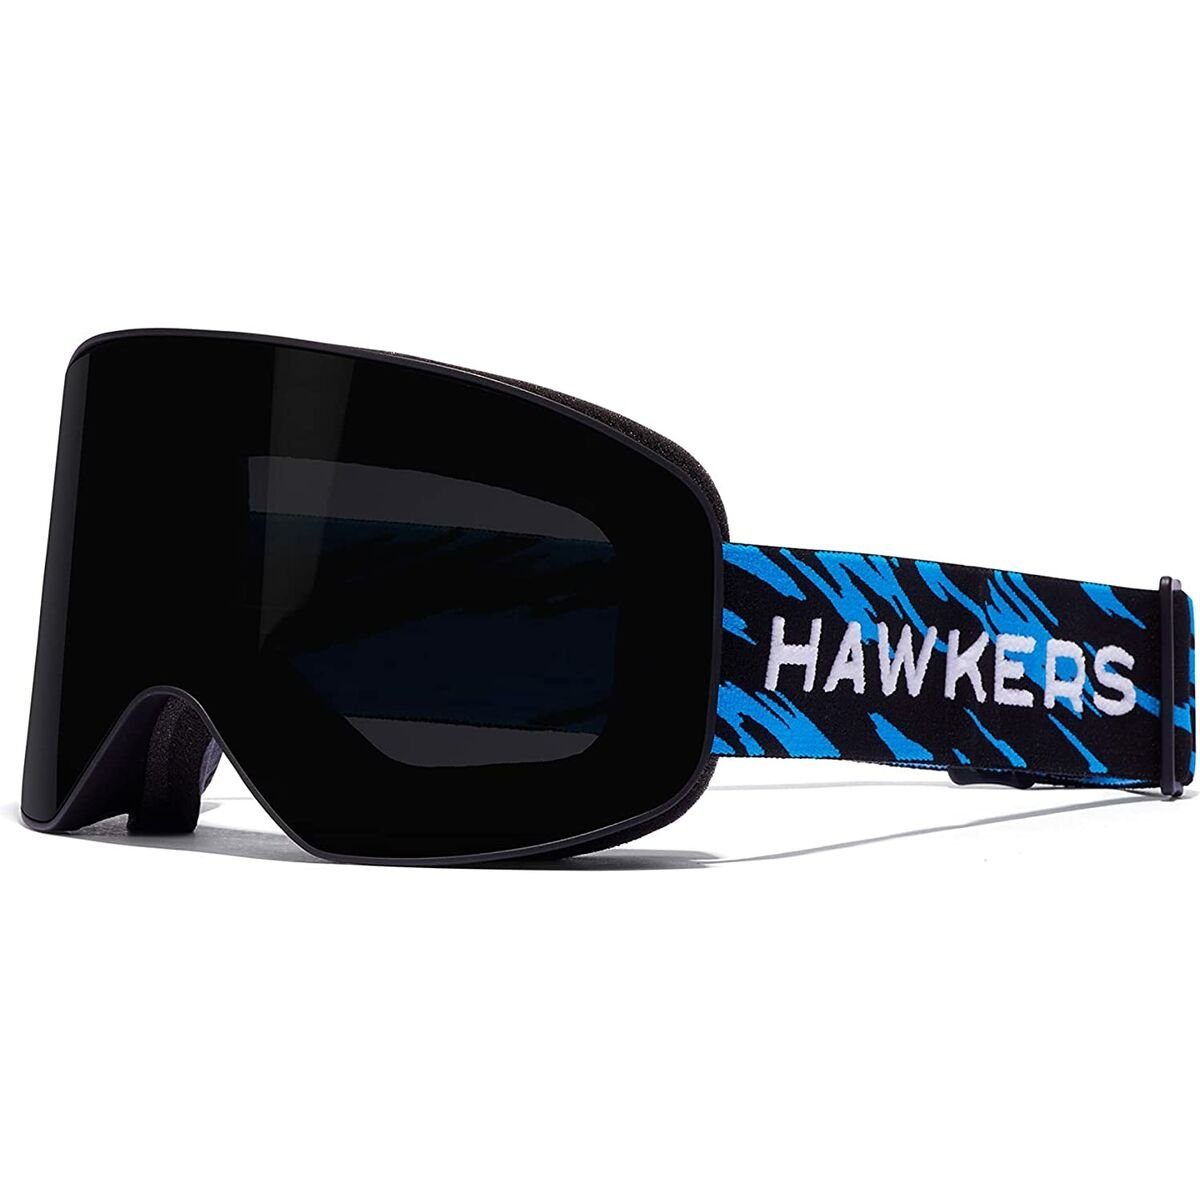 Skibrille Hawkers